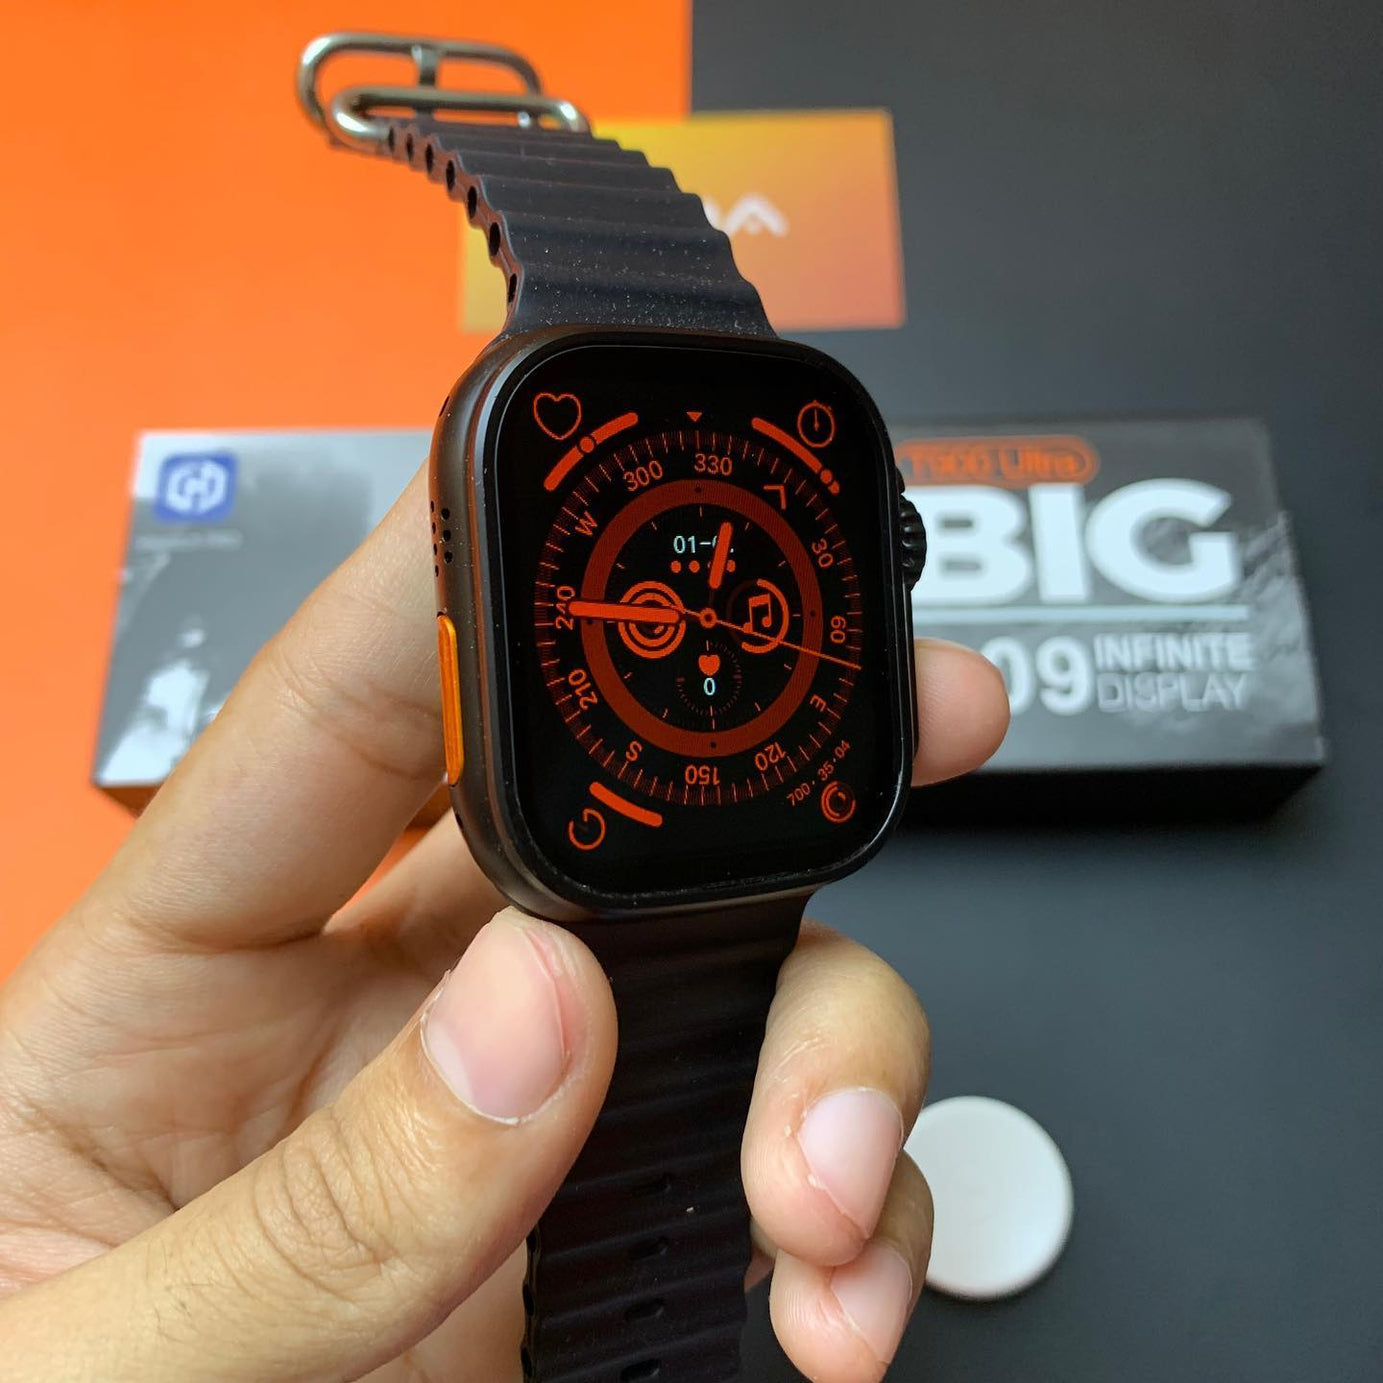 Original T900 Ultra Big 2.09 Display Smart Watch with Multifunction Functions